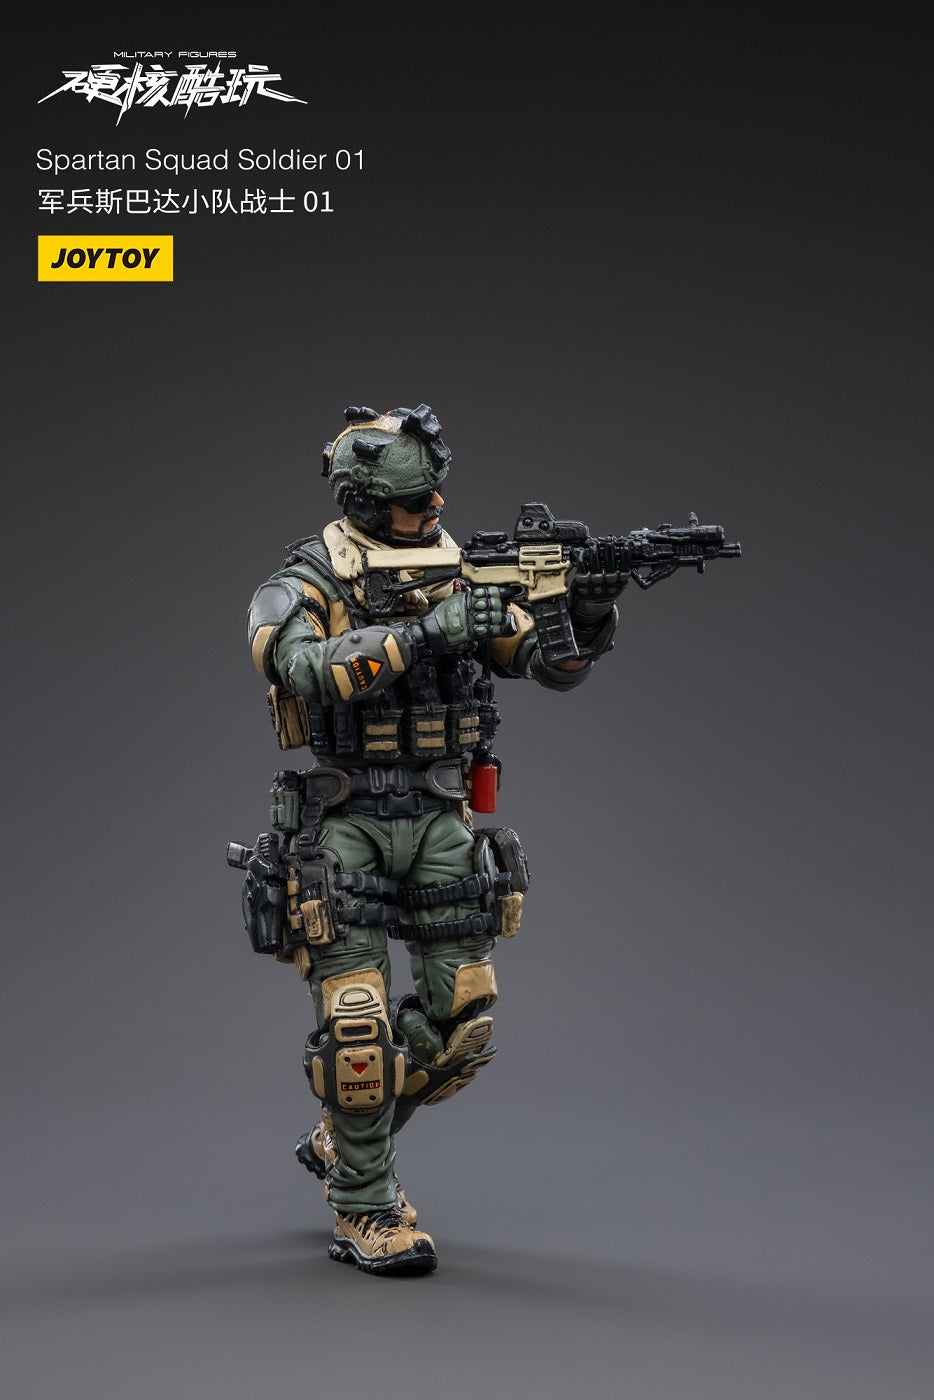 Spartan Squad Soldier 01 - Action Figure By JOYTOY